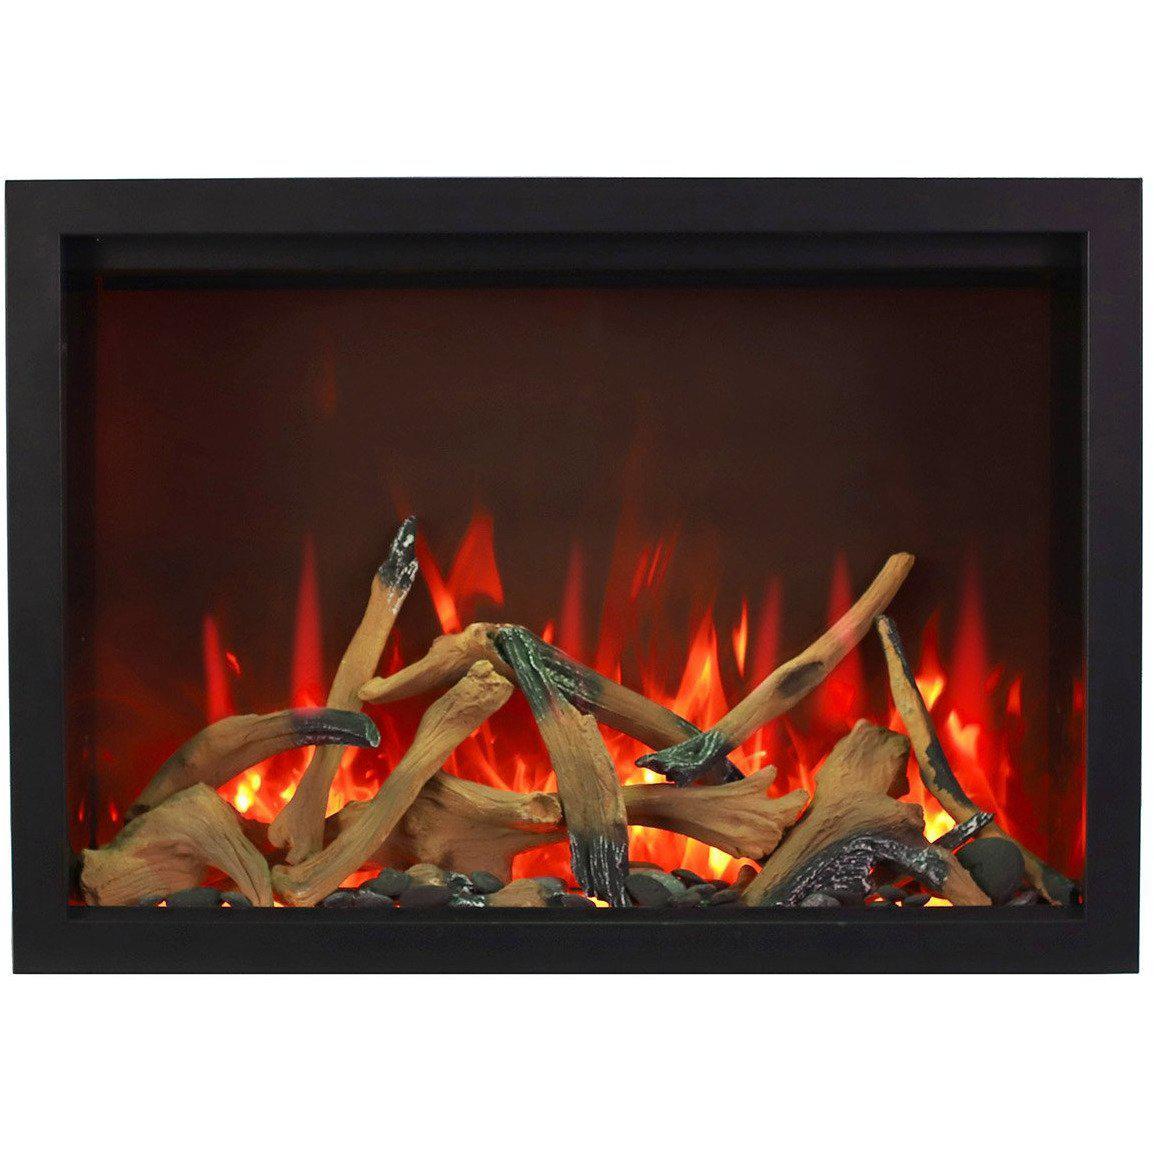 Amantii TRD-38 - Traditional Series Electric Fireplace - 96cm - Outdoorium